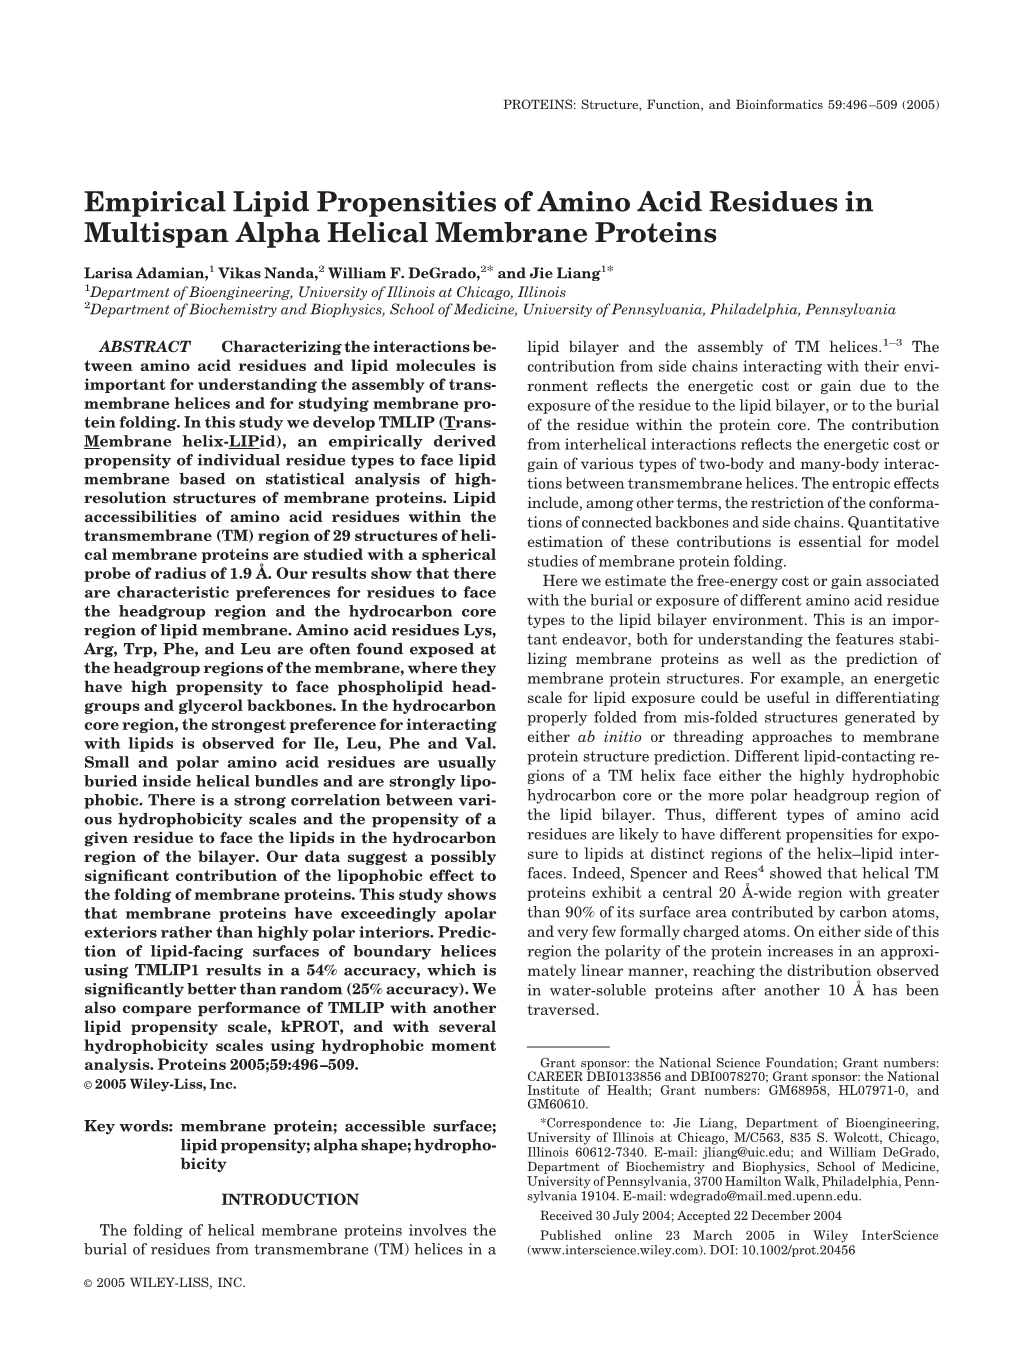 Empirical Lipid Propensities of Amino Acid Residues in Multispan Alpha Helical Membrane Proteins